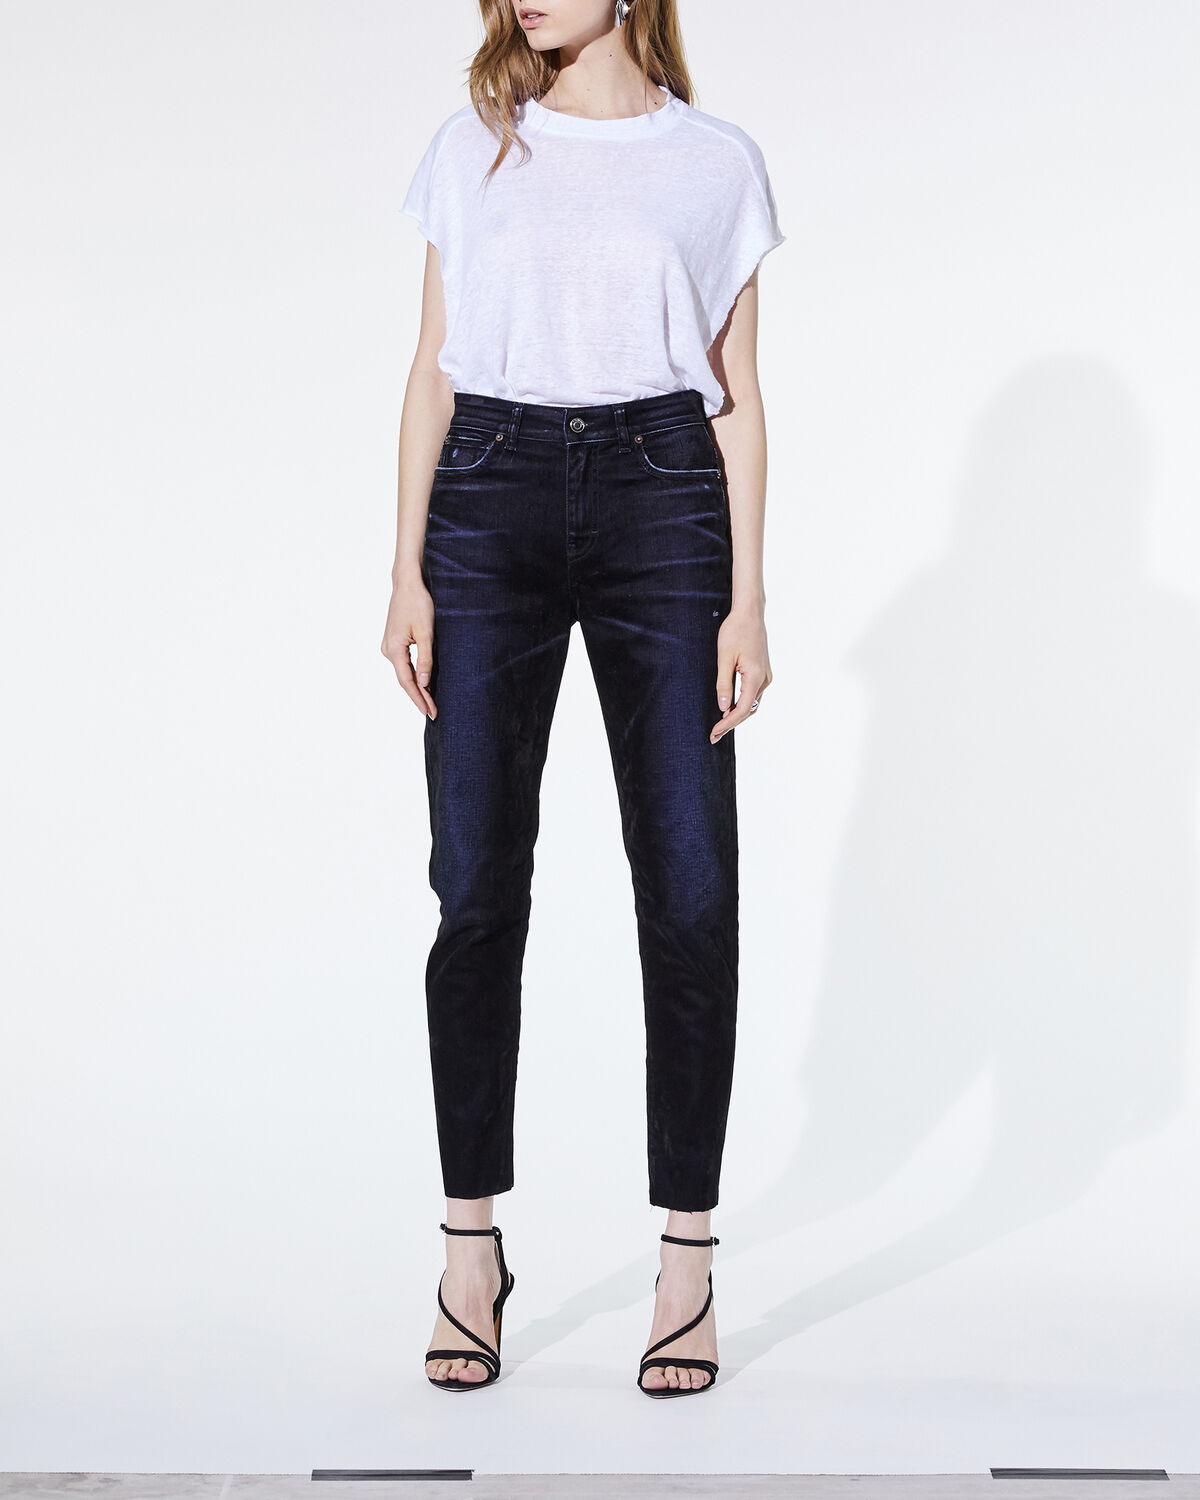 Photo of IRO Paris Ronja Jeans Black And Dark Navy - Iro Revisits The Classic Slim Jeans With This Velvet Version. It Is Distinguished By Its Subtle Fading And Frayed Edges. Wear It With A Pair Of Sandals For A Modern Look And A Pair Of Boots For A More Urban Silhouette. Fall Winter 19